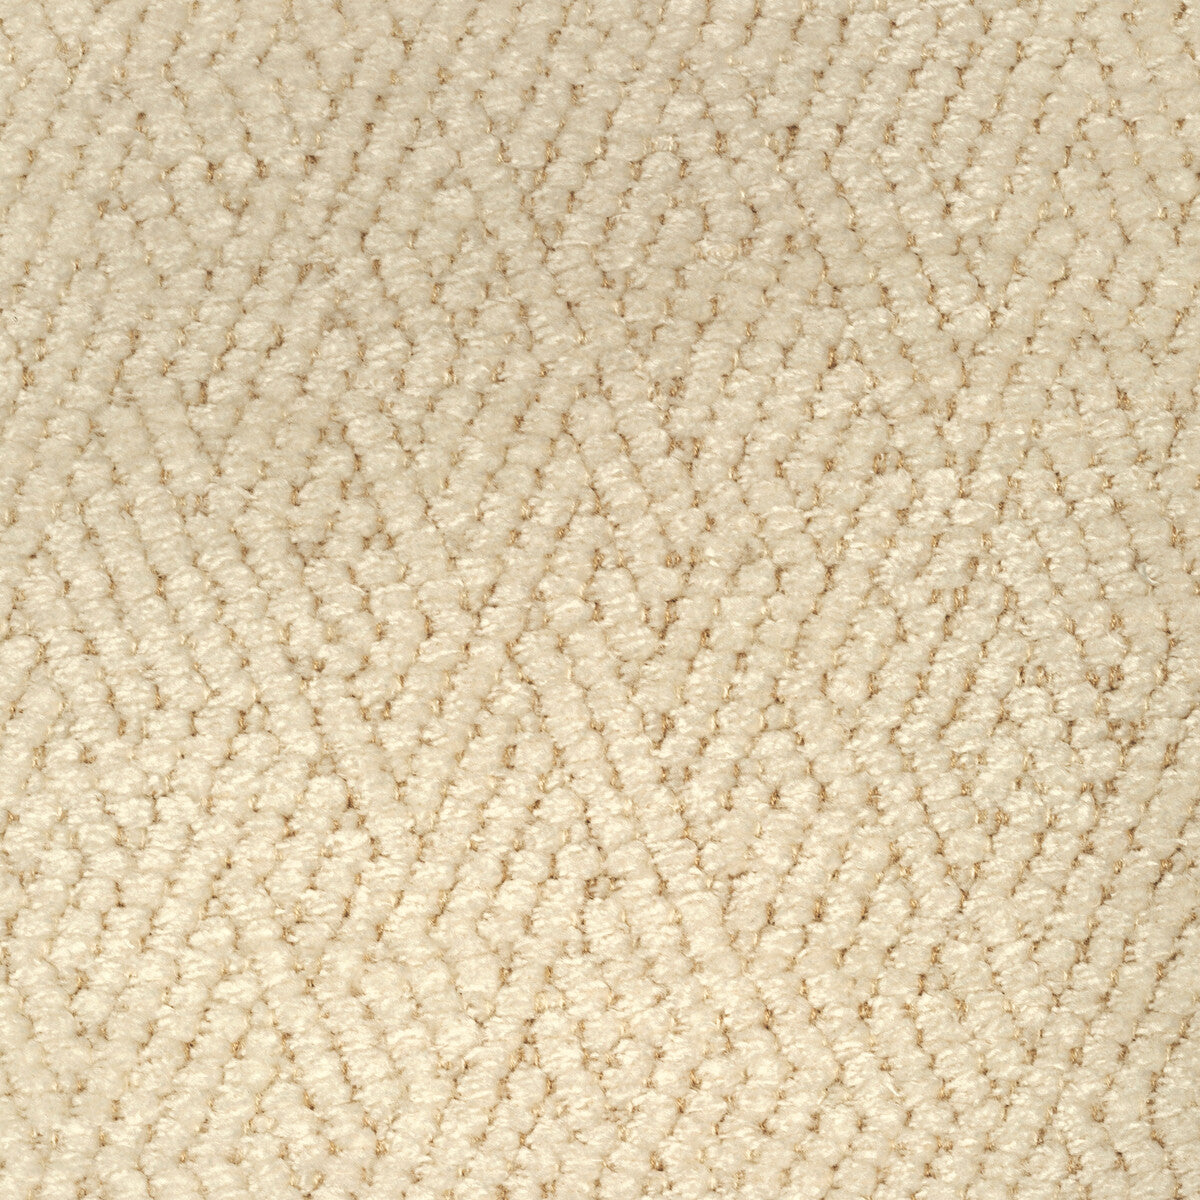 Alonso Weave fabric in sand color - pattern 2021103.16.0 - by Lee Jofa in the Triana Weaves collection